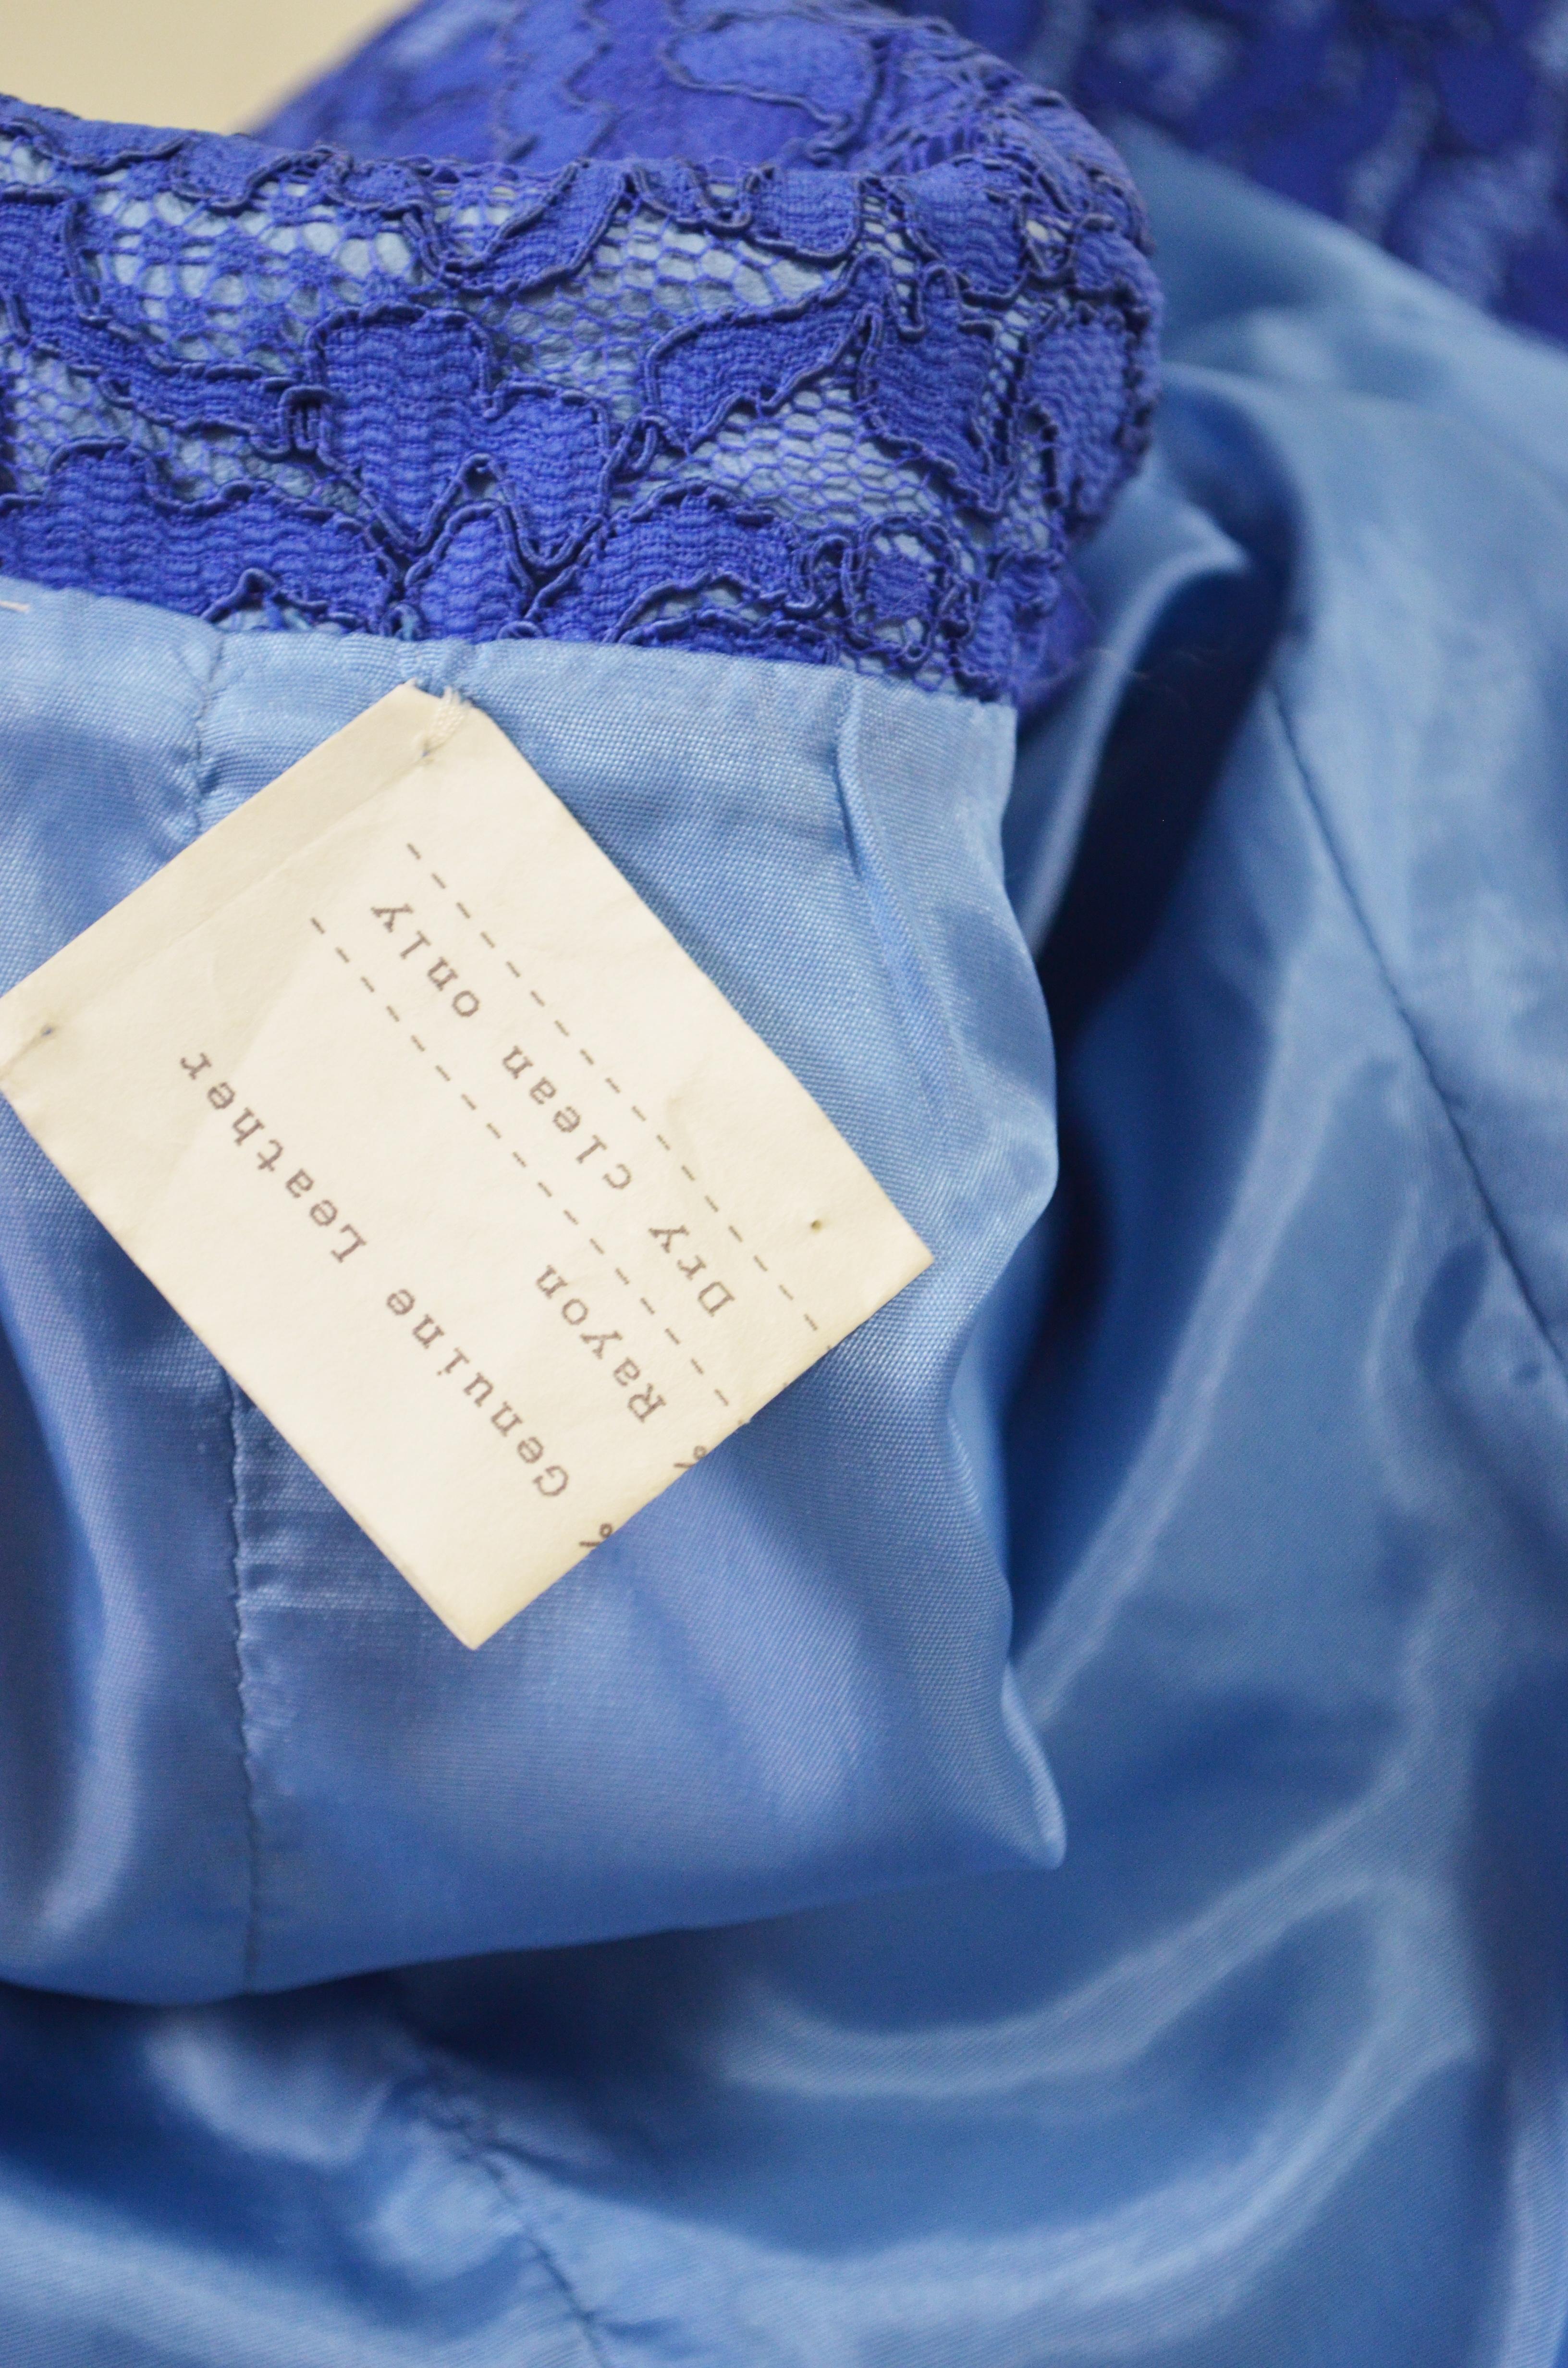 Gianni Versace Blue Lace and Leather Blazer Jacket For Sale 2